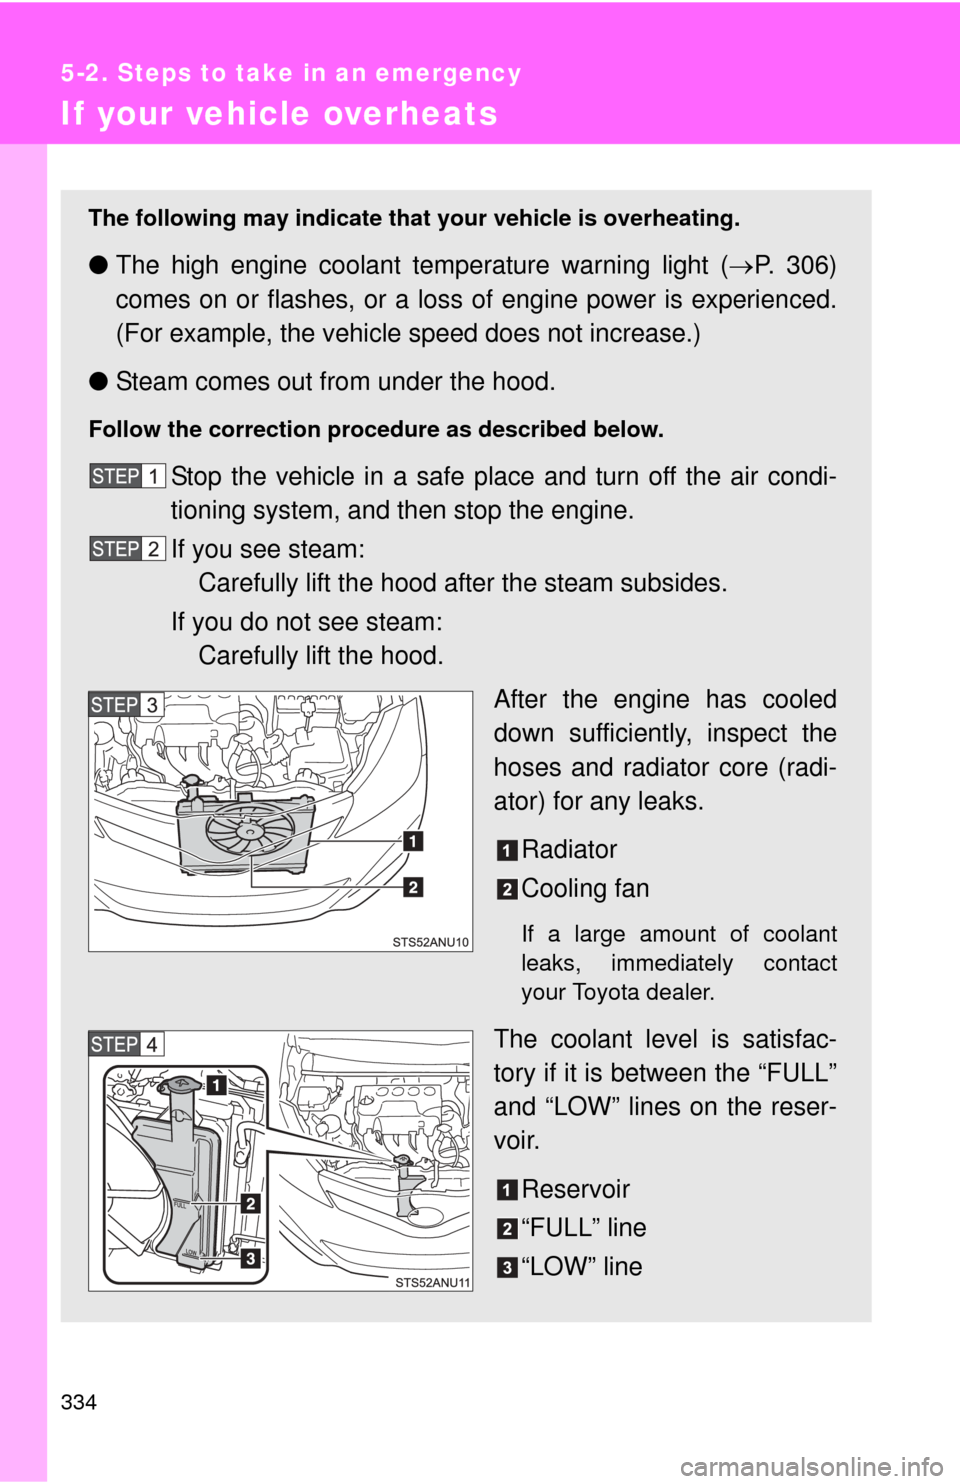 TOYOTA YARIS 2014 3.G User Guide 334
5-2. Steps to take in an emergency
If your vehicle overheats
The following may indicate that your vehicle is overheating.
●The high engine coolant te mperature warning light (P. 306)
comes on